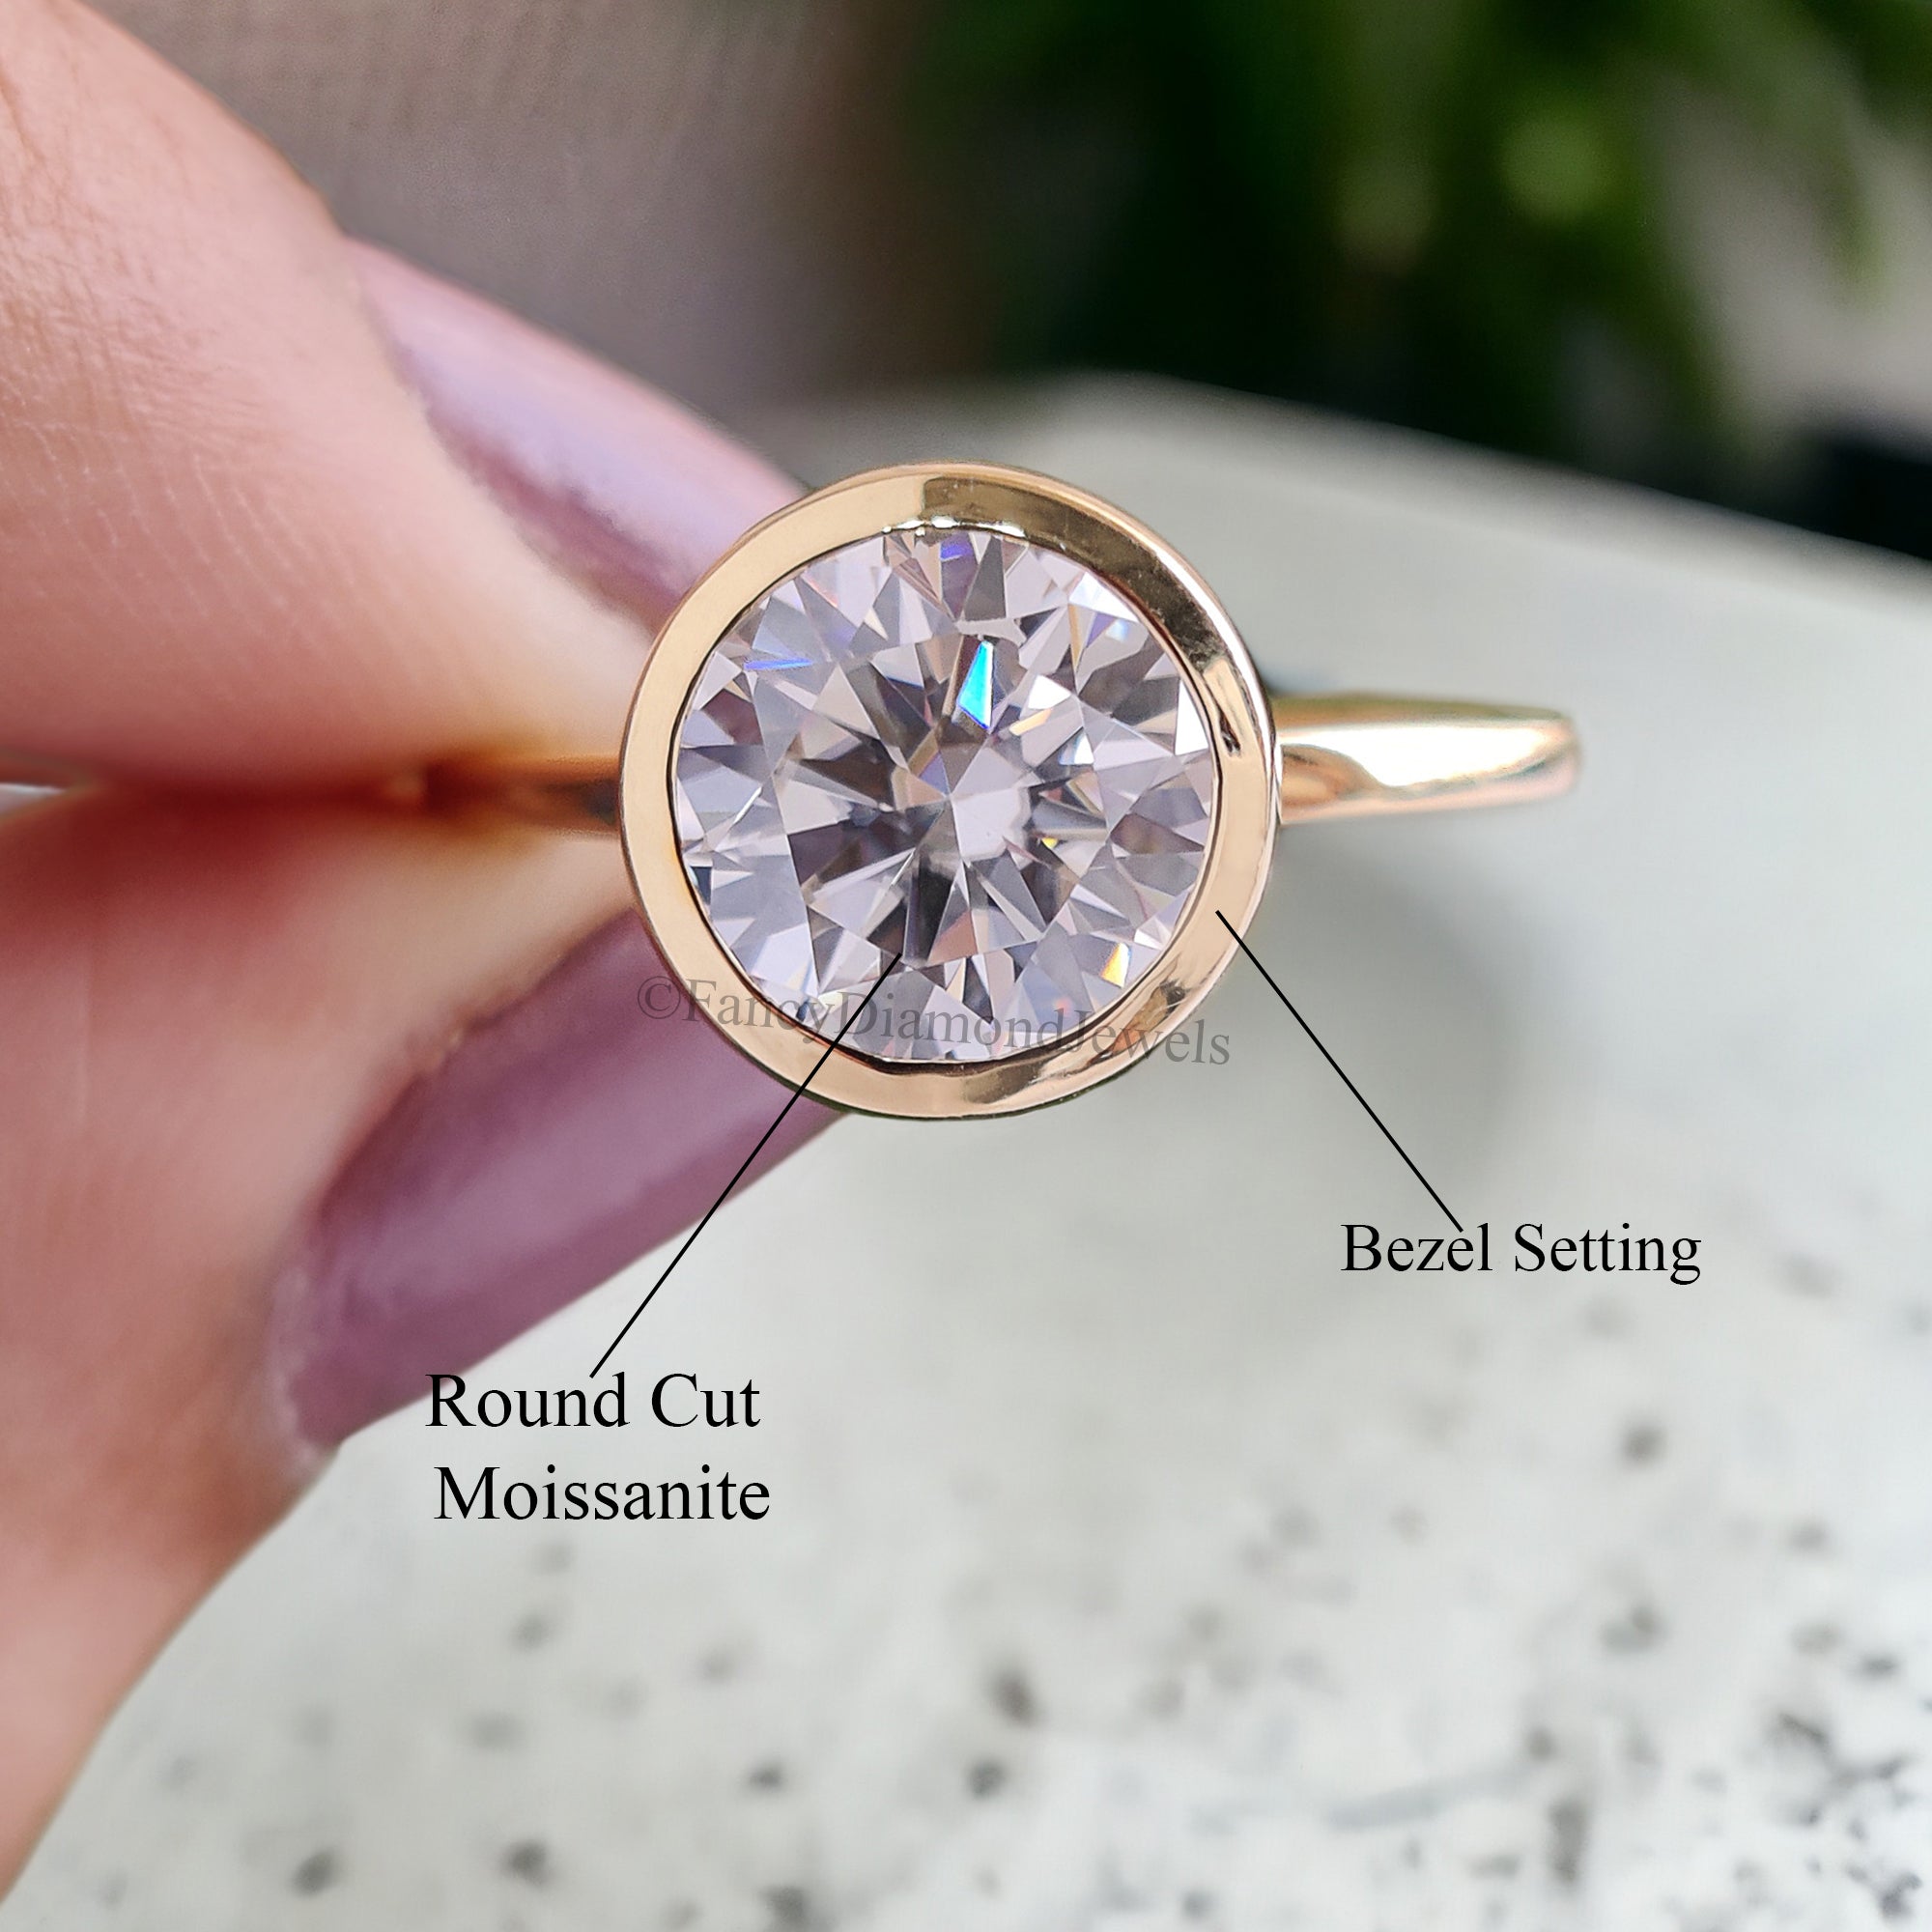 Unique 8 MM Round Heart and Arrows Cut Colorless Moissanite Bezel Set Ring Solitaire Engagement Ring Flat Comfort Fit Band Bridal Set FD113